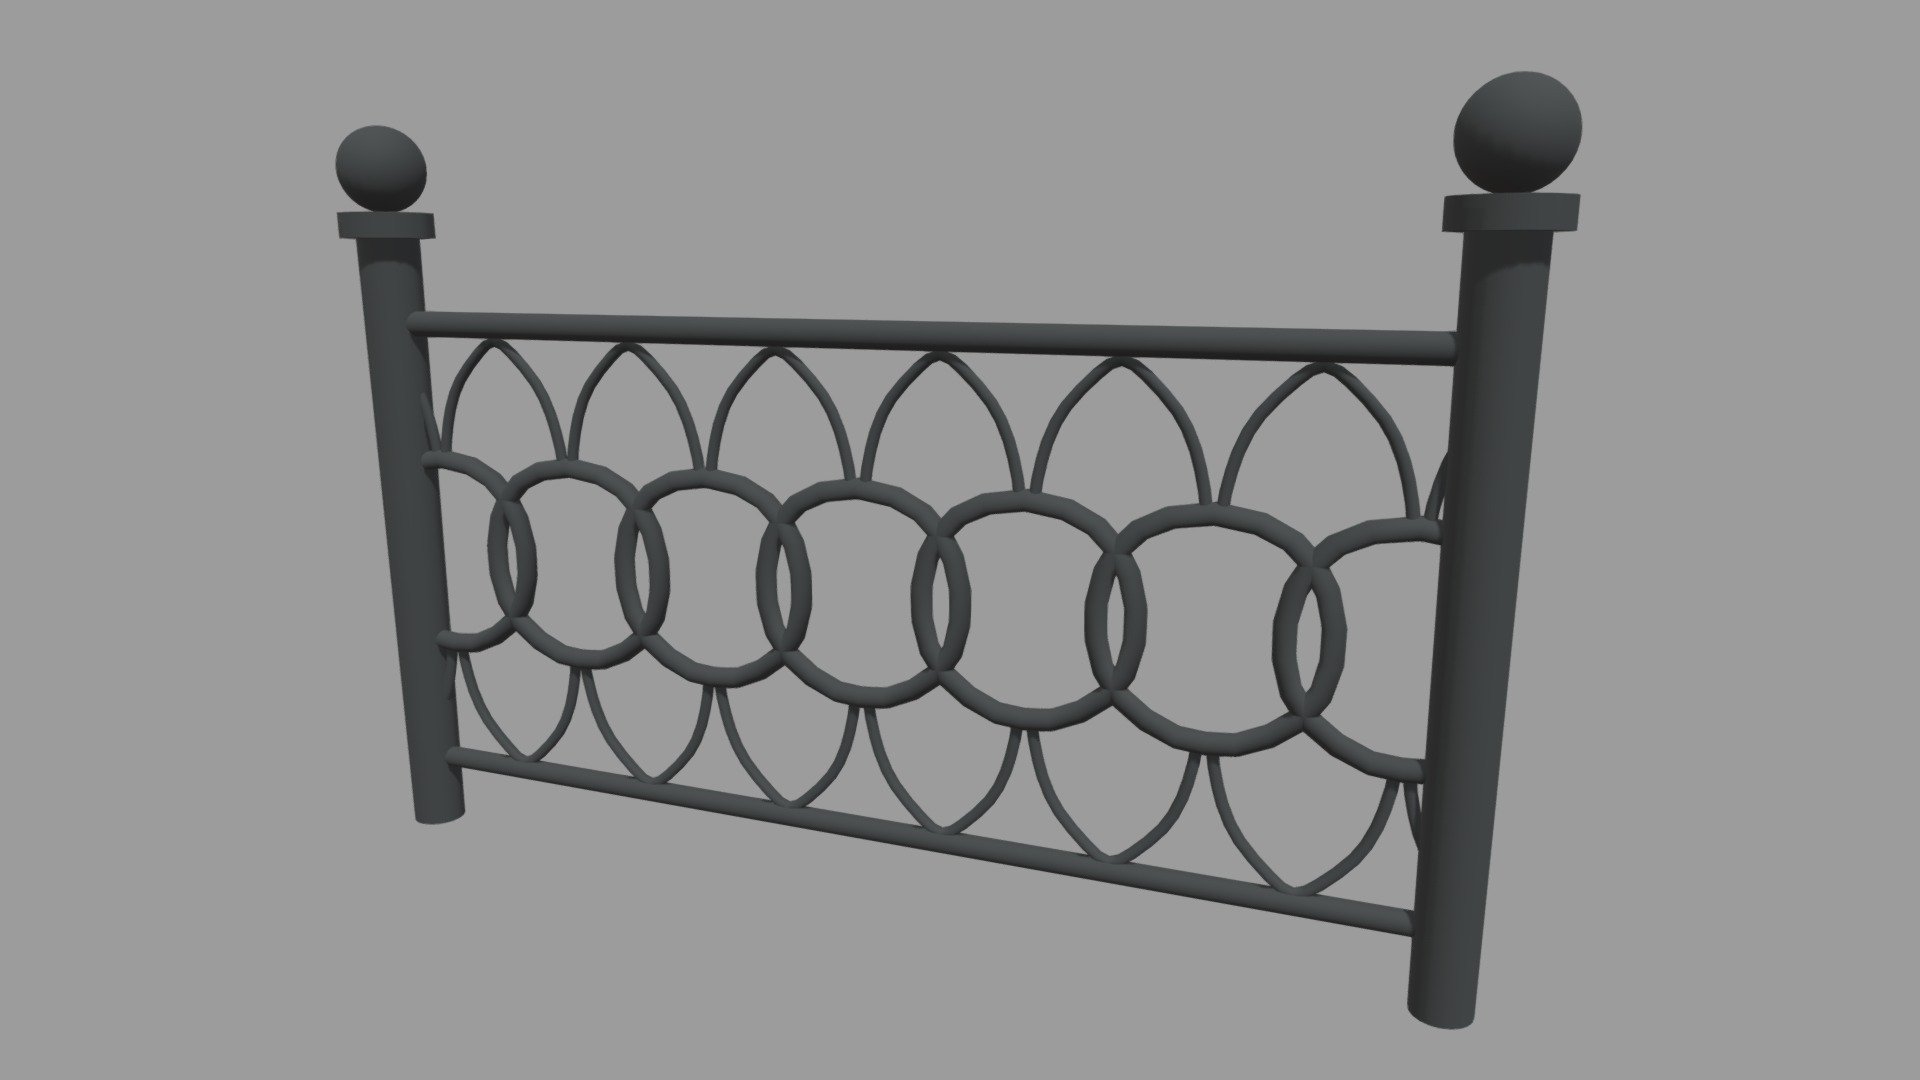 This model contains a Fence 07 based on real city fence which i modeled in Maya 2018. There is one unique material, a black material with one unique UV.

These models will be part of a huge city elements pack which will be added as a big pack and separately on my profile.

If you need any kind of help contact me, i will help you with everything i can. If you like the model please give me some feedback, I would appreciate it.

Don’t doubt on contacting me, i would be very happy to help. If you experience any kind of difficulties, be sure to contact me and i will help you. Sincerely Yours, ViperJr3D - Fence 07 - Buy Royalty Free 3D model by ViperJr3D 3d model